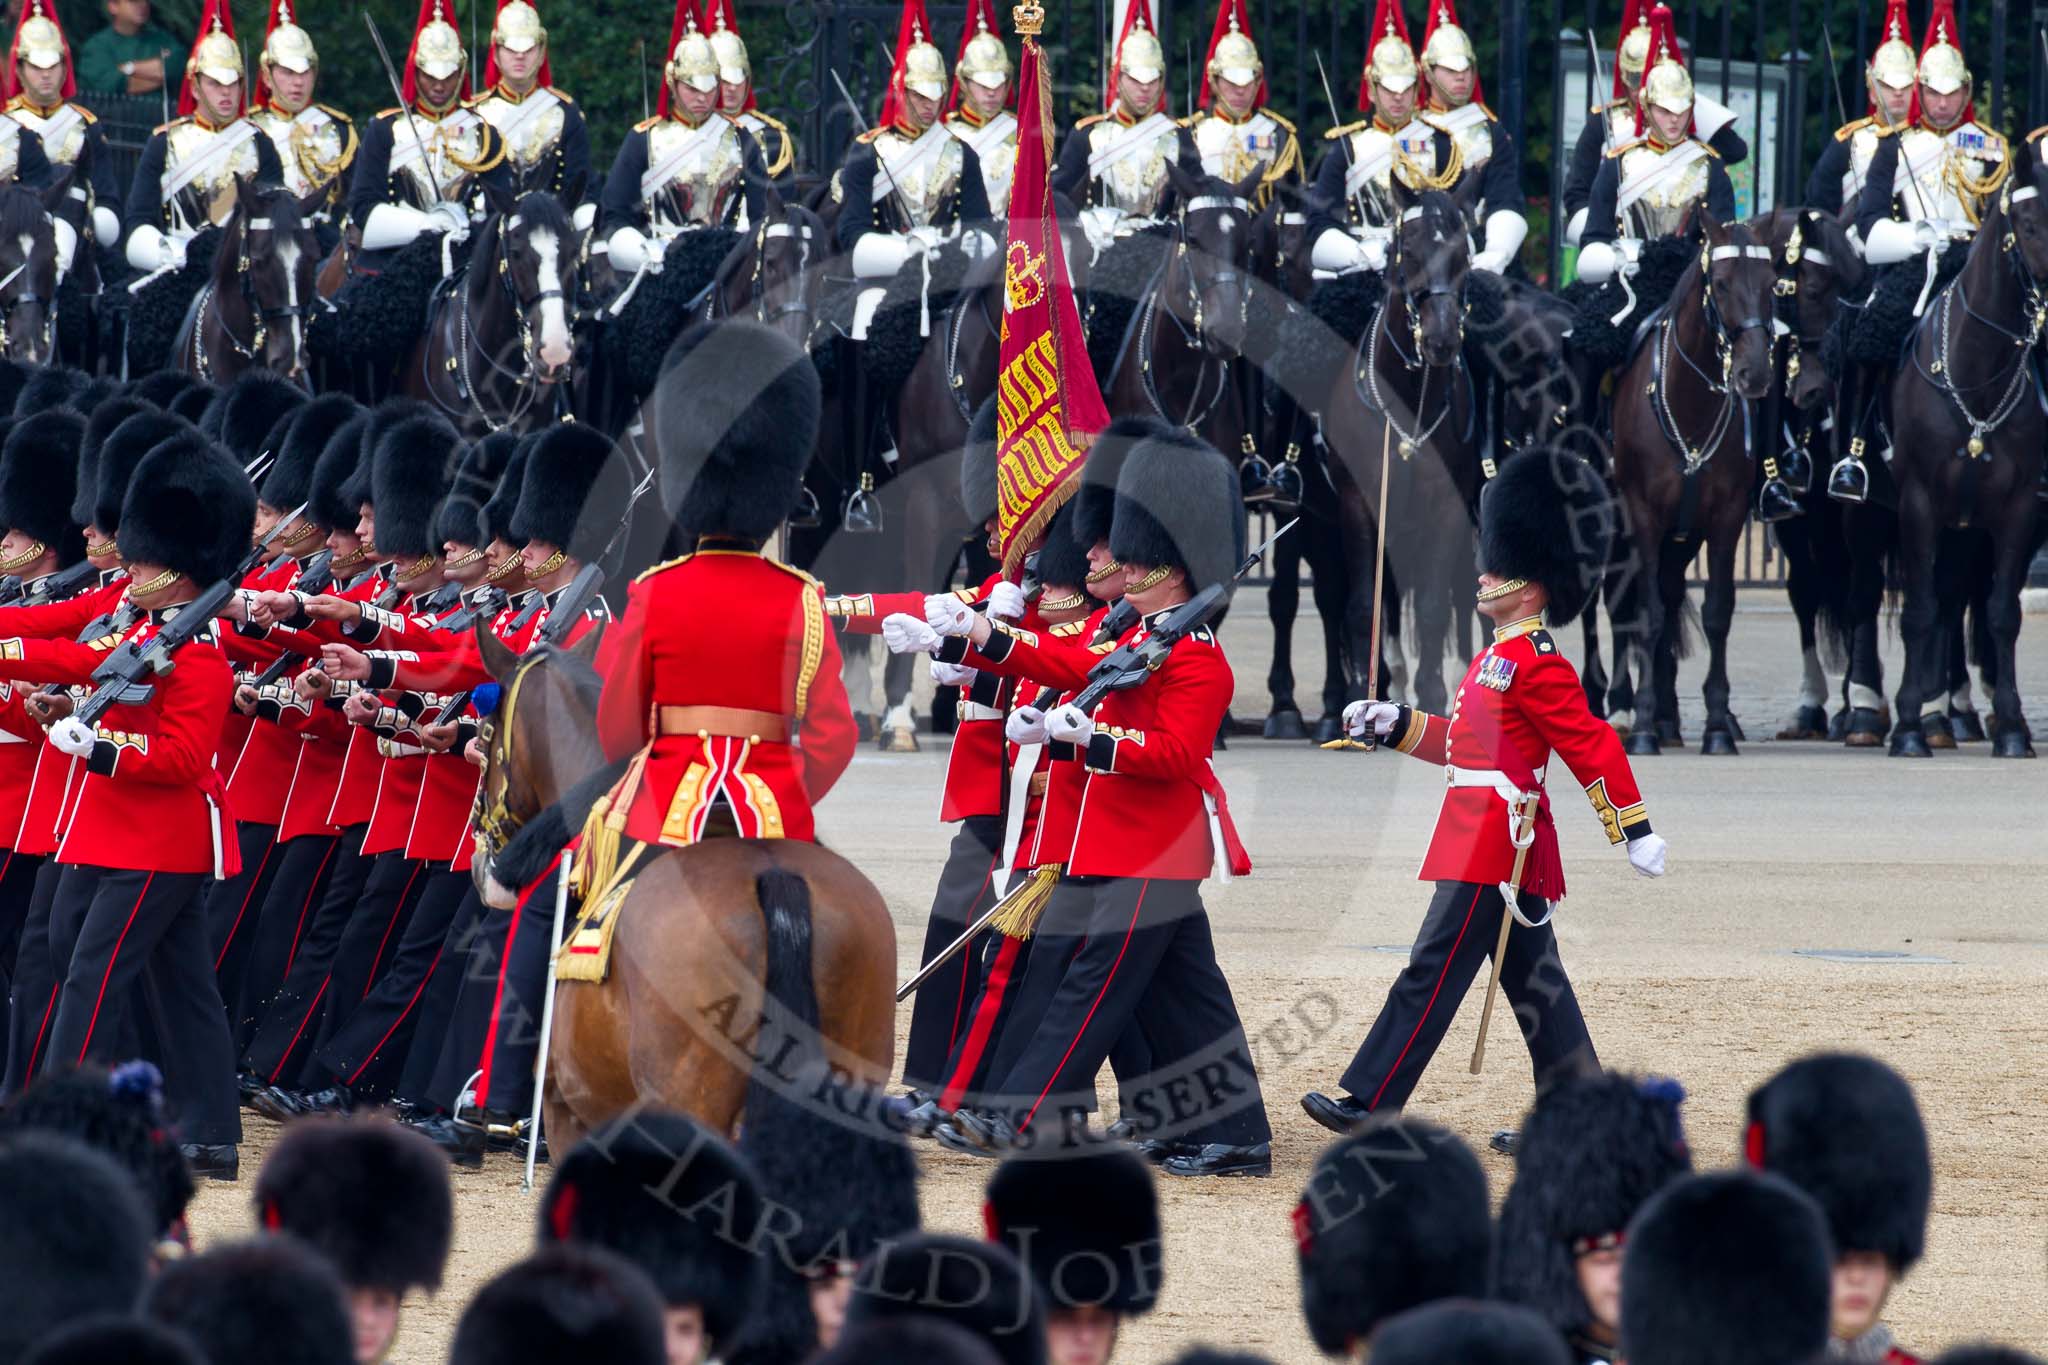 Trooping the Colour 2011: Passing the Field Officer, Lieutenant Colonel Jopp, the Escort to the Colour, 1st Battalion Scots Guards, during the March Past in slow time. Carrying the Colour the Ensign, Tom Ogilvy, to his left Colour Sergeant Chris Millin. In the background the Household Cavalry, here the Blues and Royals..
Horse Guards Parade, Westminster,
London SW1,
Greater London,
United Kingdom,
on 11 June 2011 at 11:50, image #301